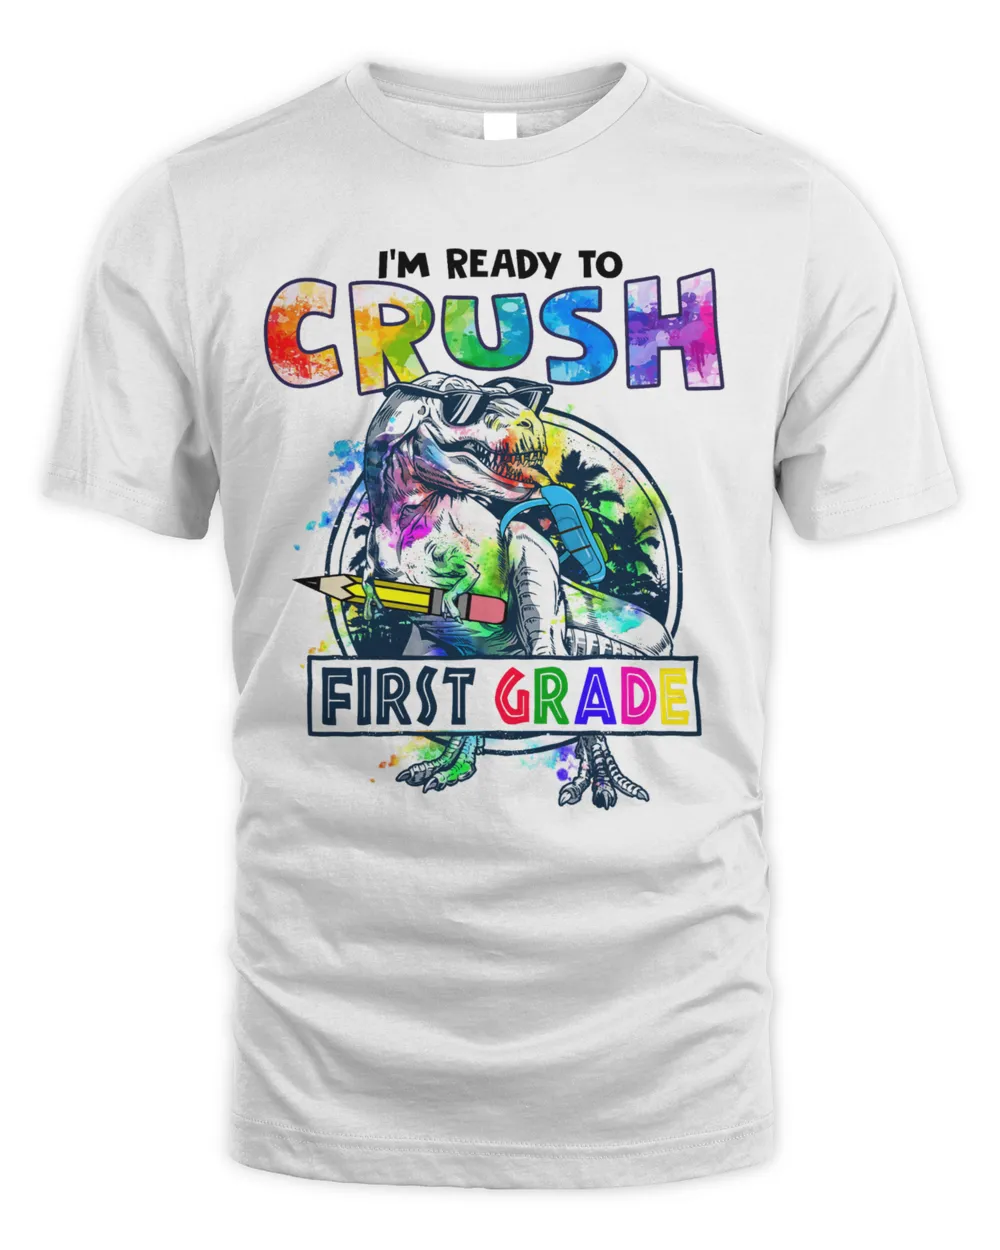 I'm Ready To Crush first grade-watercolor saurus